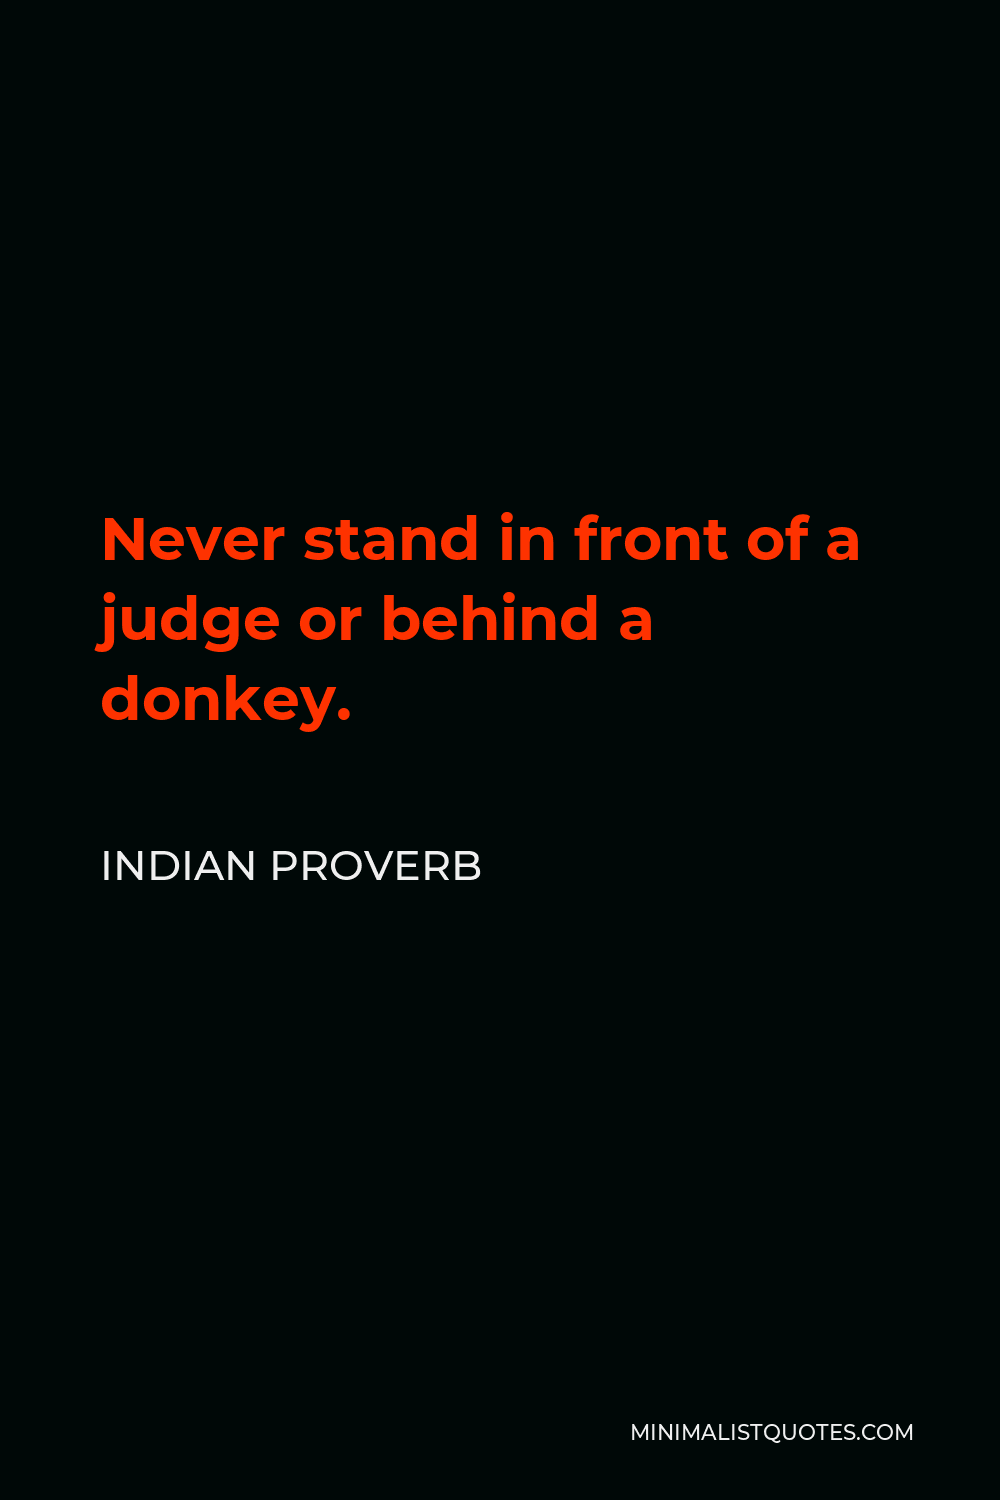 Indian Proverb Quote - Never stand in front of a judge or behind a donkey.